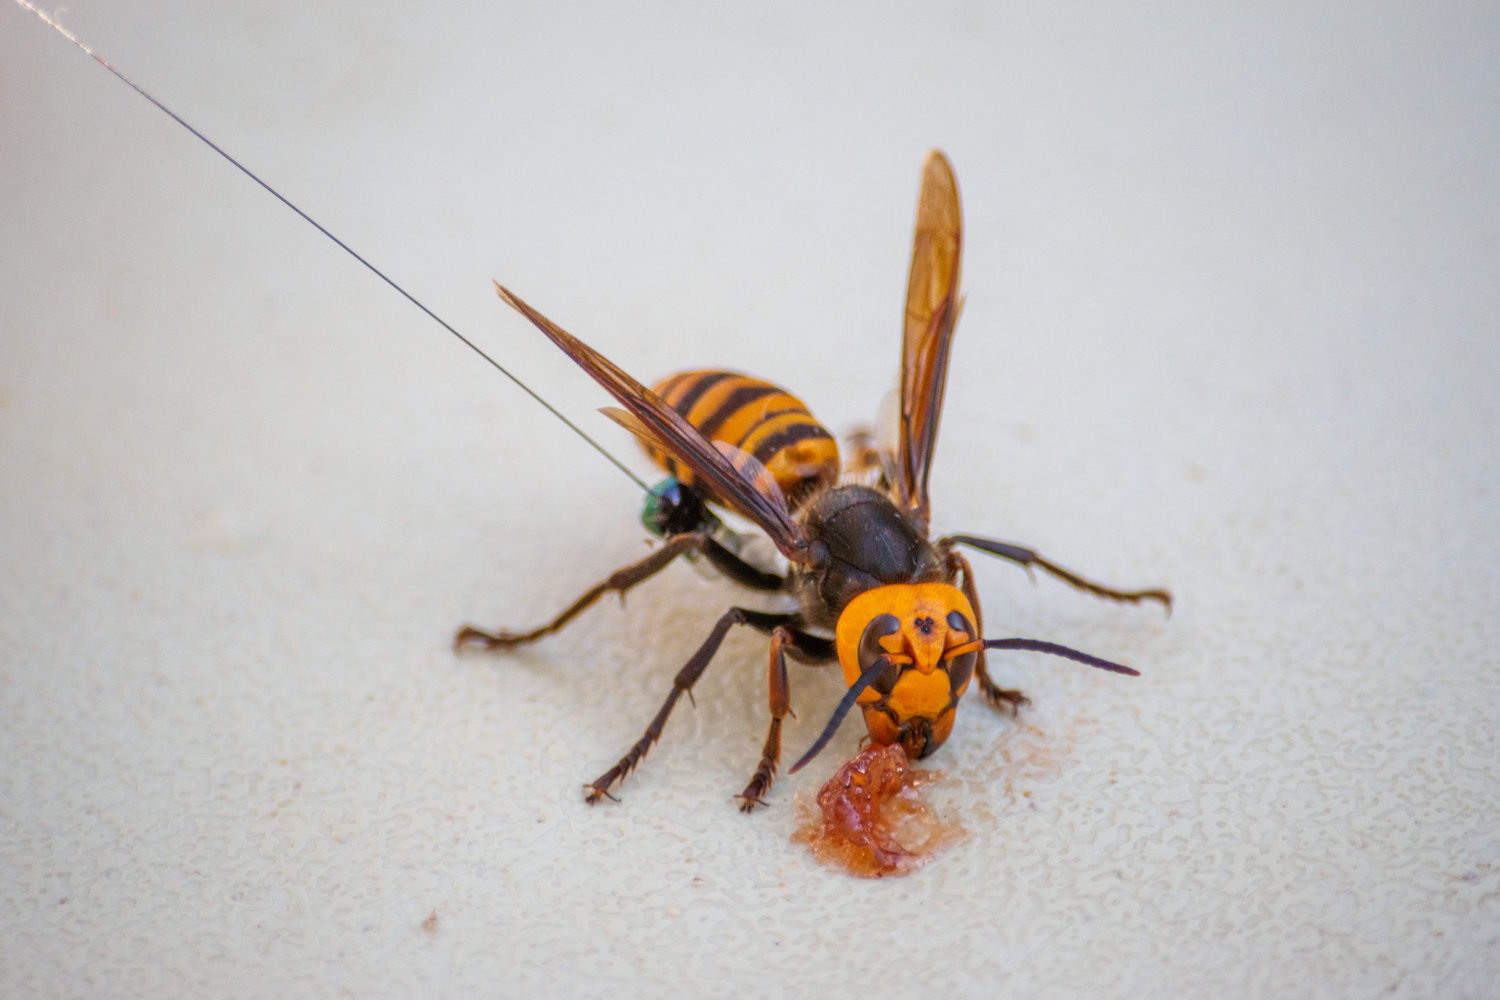 A northern giant hornet found in east Blaine in 2020.